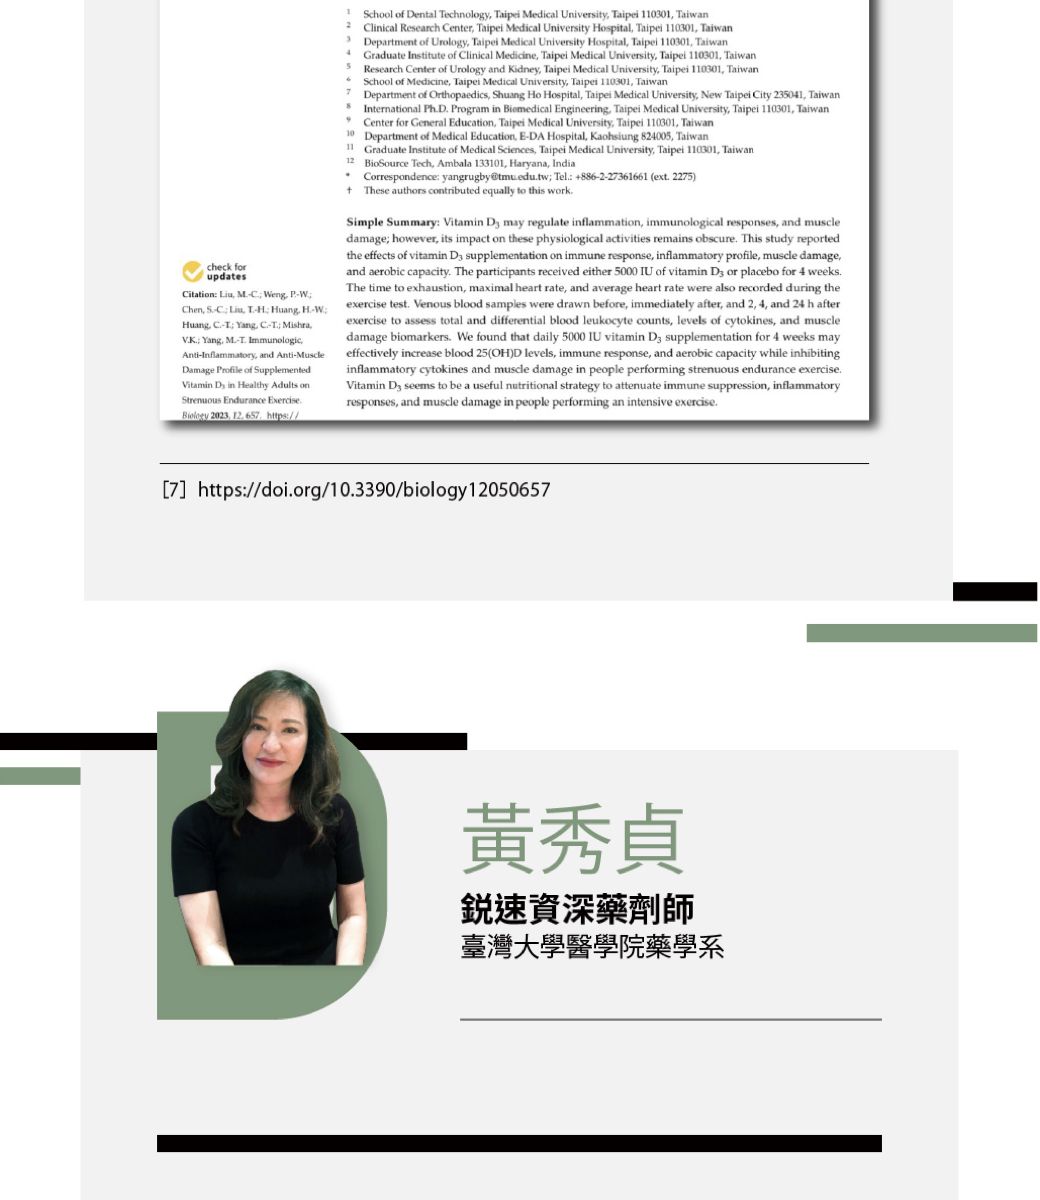 check forupdatesitation    Chen C    Huang  Yang -  Yang  ImmunologicAnti-Inflammatory and Anti-MuscleDamage  of SupplementedVitamin D in Healthy Adults onStrenuous Endurance Exercise 2023 12  https//4School of Dental Technology Taipei Medical University Taipei 1301 TaiwanClinical Research Center Taipei Medical University Hospital Taipei 110301 TaiwanDepartment of Urology Taipei Medical University Hospital Taipei 110301 TaiwanGraduate Institute of Clinical Medicine Taipei Medical University Taipei 110301 TaiwanResearch Center of Urology and Kidney Taipei Medical University Taipei 110301 TaiwanSchool of Medicine Taipei Medical University Taipei 110301 TaiwanDepartment of Orthopaedics Shuang Ho Hospital Taipei Medical University, New Taipei City 235041, TaiwanInternational PhD Program in Biomedical Engineering, Taipei Medical University, Taipei 110301, TaiwanCenter for General Education, Taipei Medical University, Taipei 110301, Taiwan10 Department of Medical Education, E-DA Hospital, Kaohsiung 824005, TaiwanGraduate Institute of Medical Sciences, Taipei Medical University, Taipei 110301, Taiwan12 BioSource Tech, Ambala 133101, Haryana, India Correspondence yangrugby@tmuedutw Tel 886-2-2361661 (ext 2275) These authors contributed equally to this workSimple Summary: Vitamin  may regulate inflammation, immunological responses, and muscledamage however, its impact on these physiological activities remains obscure. This study reportedthe effects of vitamin  supplementation on immune response, inflammatory profile, muscle damage,and aerobic capacity. The participants received either 5000 IU of vitamin  or placebo for 4 weeks.The time to exhaustion, maximal heart rate, and average heart rate were also recorded during theexercise test. Venous blood samples were drawn before, immediately after, and 2, 4, and 24 h afterexercise to assess total and differential blood leukocyte counts, levels of cytokines, and muscledamage biomarkers. We found that daily 5000 IU vitamin  supplementation for 4 weeks mayeffectively increase blood 25(OH)D levels, immune response, and aerobic capacity while inhibitinginflammatory cytokines and muscle damage in people performing strenuous endurance exercise.Vitamin  seems to be a useful nutritional strategy to attenuate immune suppression, inflammatoryresponses, and muscle damage in people performing an intensive exercise.7 https://doi.org/10.3390/biology12050657黃秀貞速資深藥劑師臺灣大學醫學院藥學系